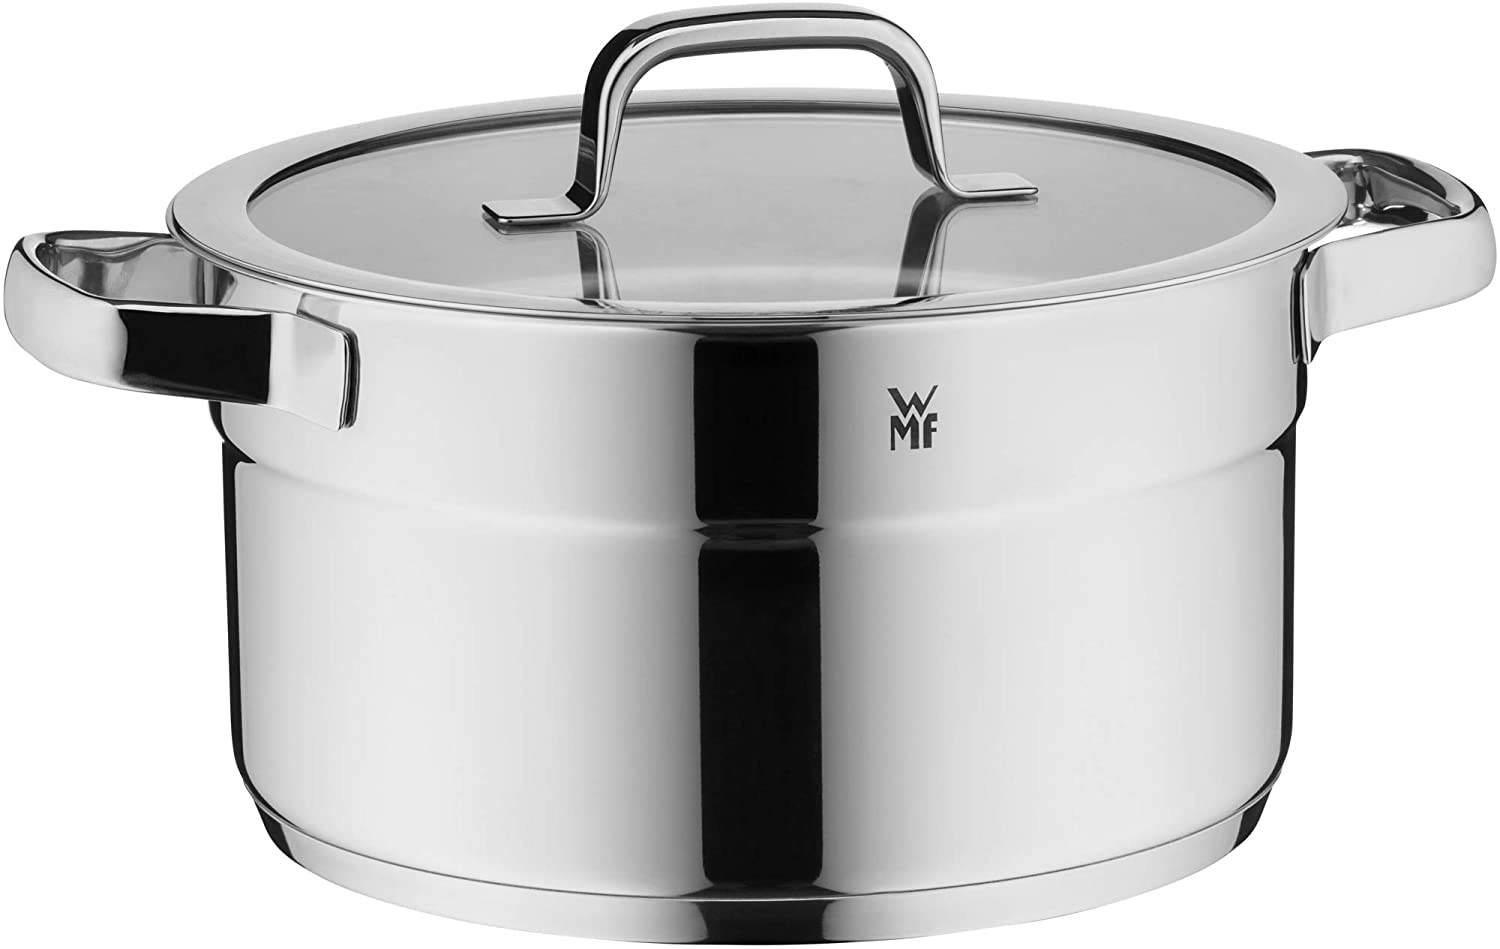 WMF Compact Cuisine Saucepan 16 cm without Lid 1.5 L Cromargan Polished Stainless Steel Inner Scale Induction Saucepan Uncoated